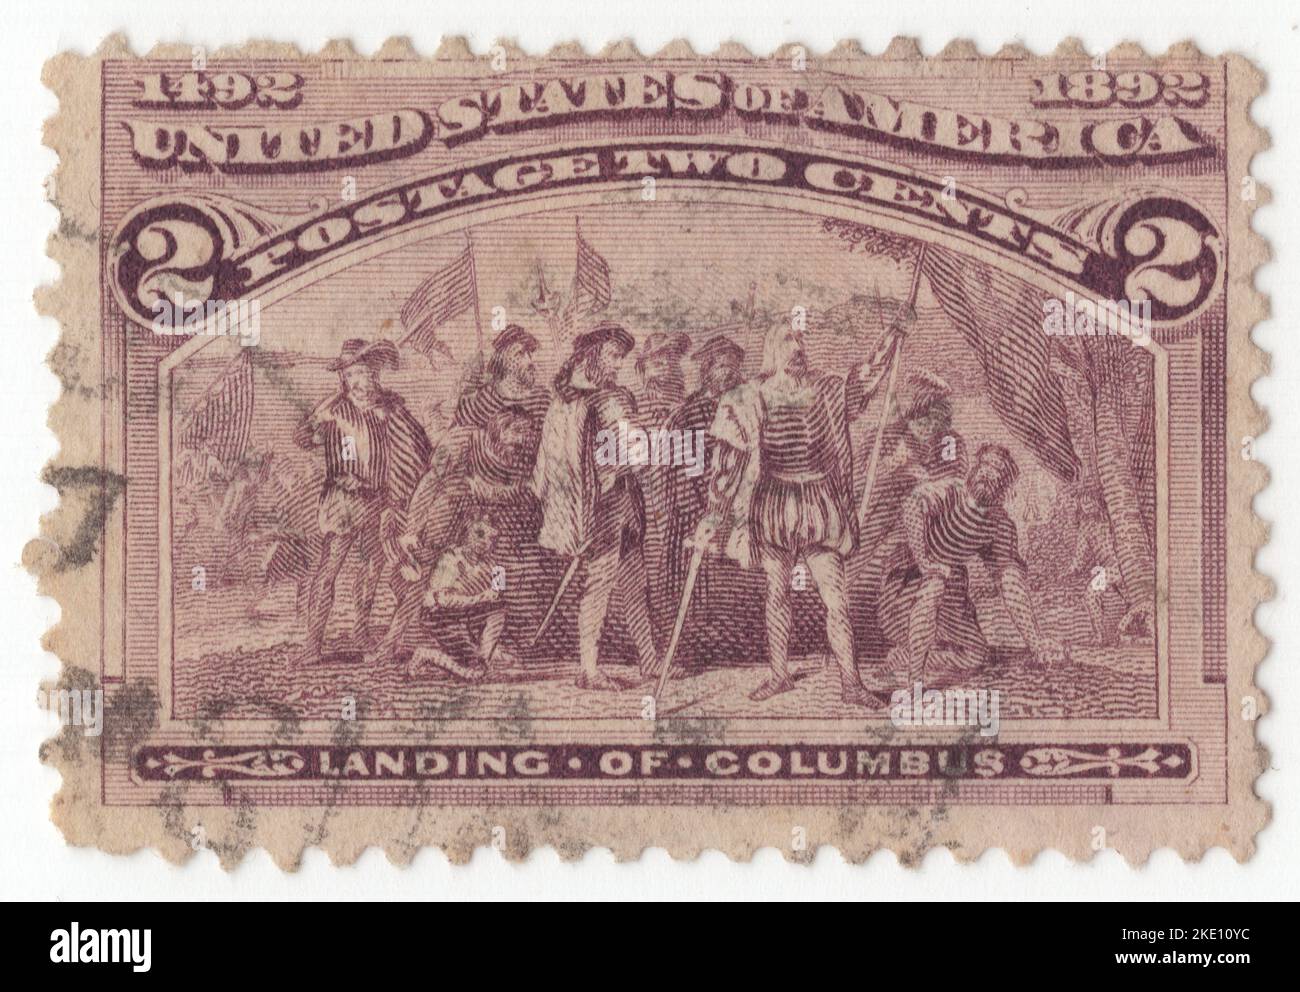 USA - 1893: An 2 cents brown-violet postage stamp depicting scene Landing of Columbus, Columbian Issue. The World Columbian Exposition of 1893 commemorated the 400th anniversary of the landing of Christopher Columbus in the Americas. The stamps were interesting and attractive, designed to appeal to not only postage stamps collectors but to historians, artists and of course the general public who bought them in record numbers because of the fanfare of the Columbian Exposition of the World's Fair of 1892 in Chicago, Illinois Stock Photo